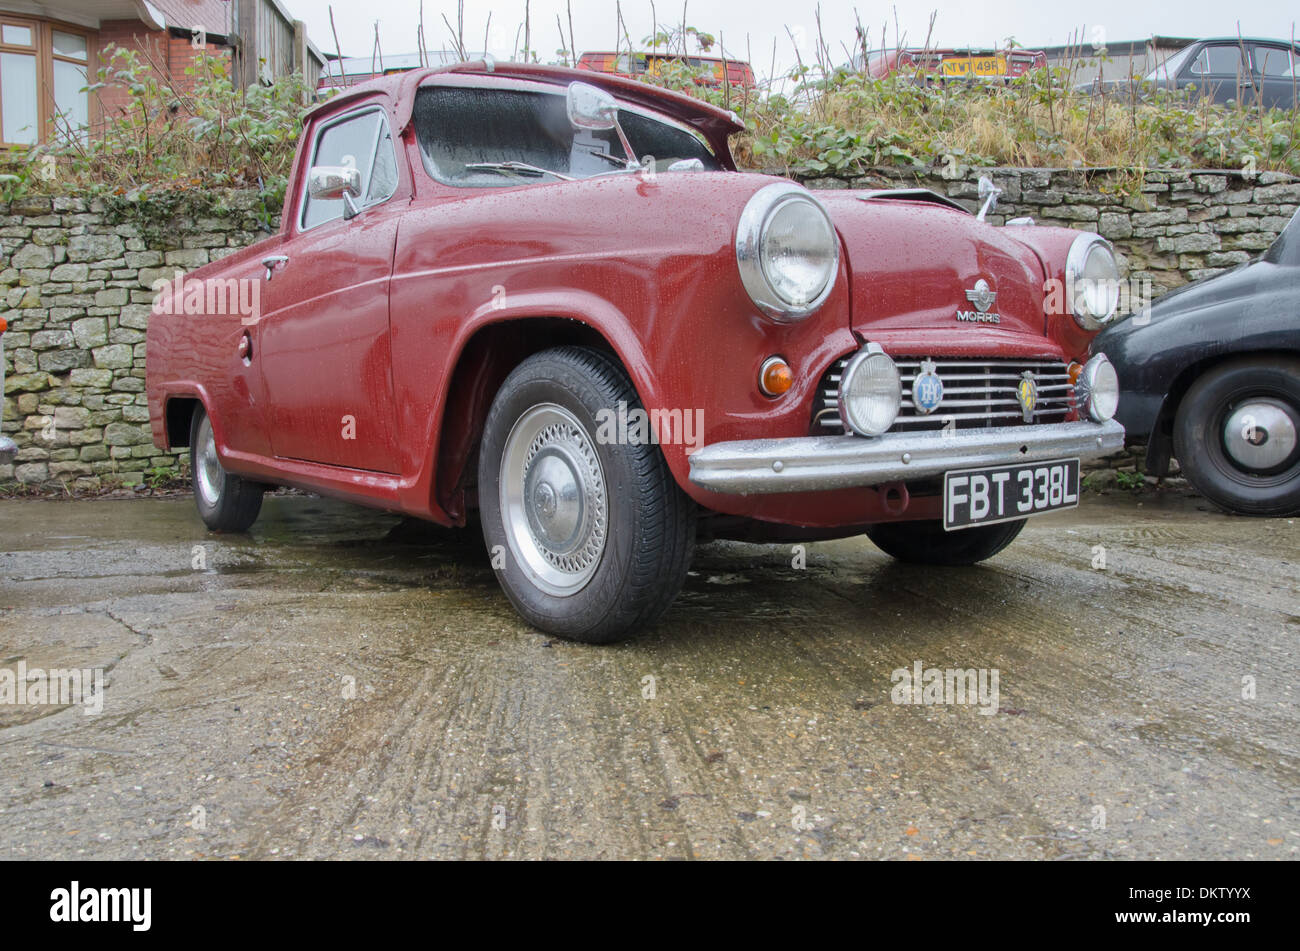 Red Classic pick up truck based on Austin A50 Car.  Rainy day Stock Photo